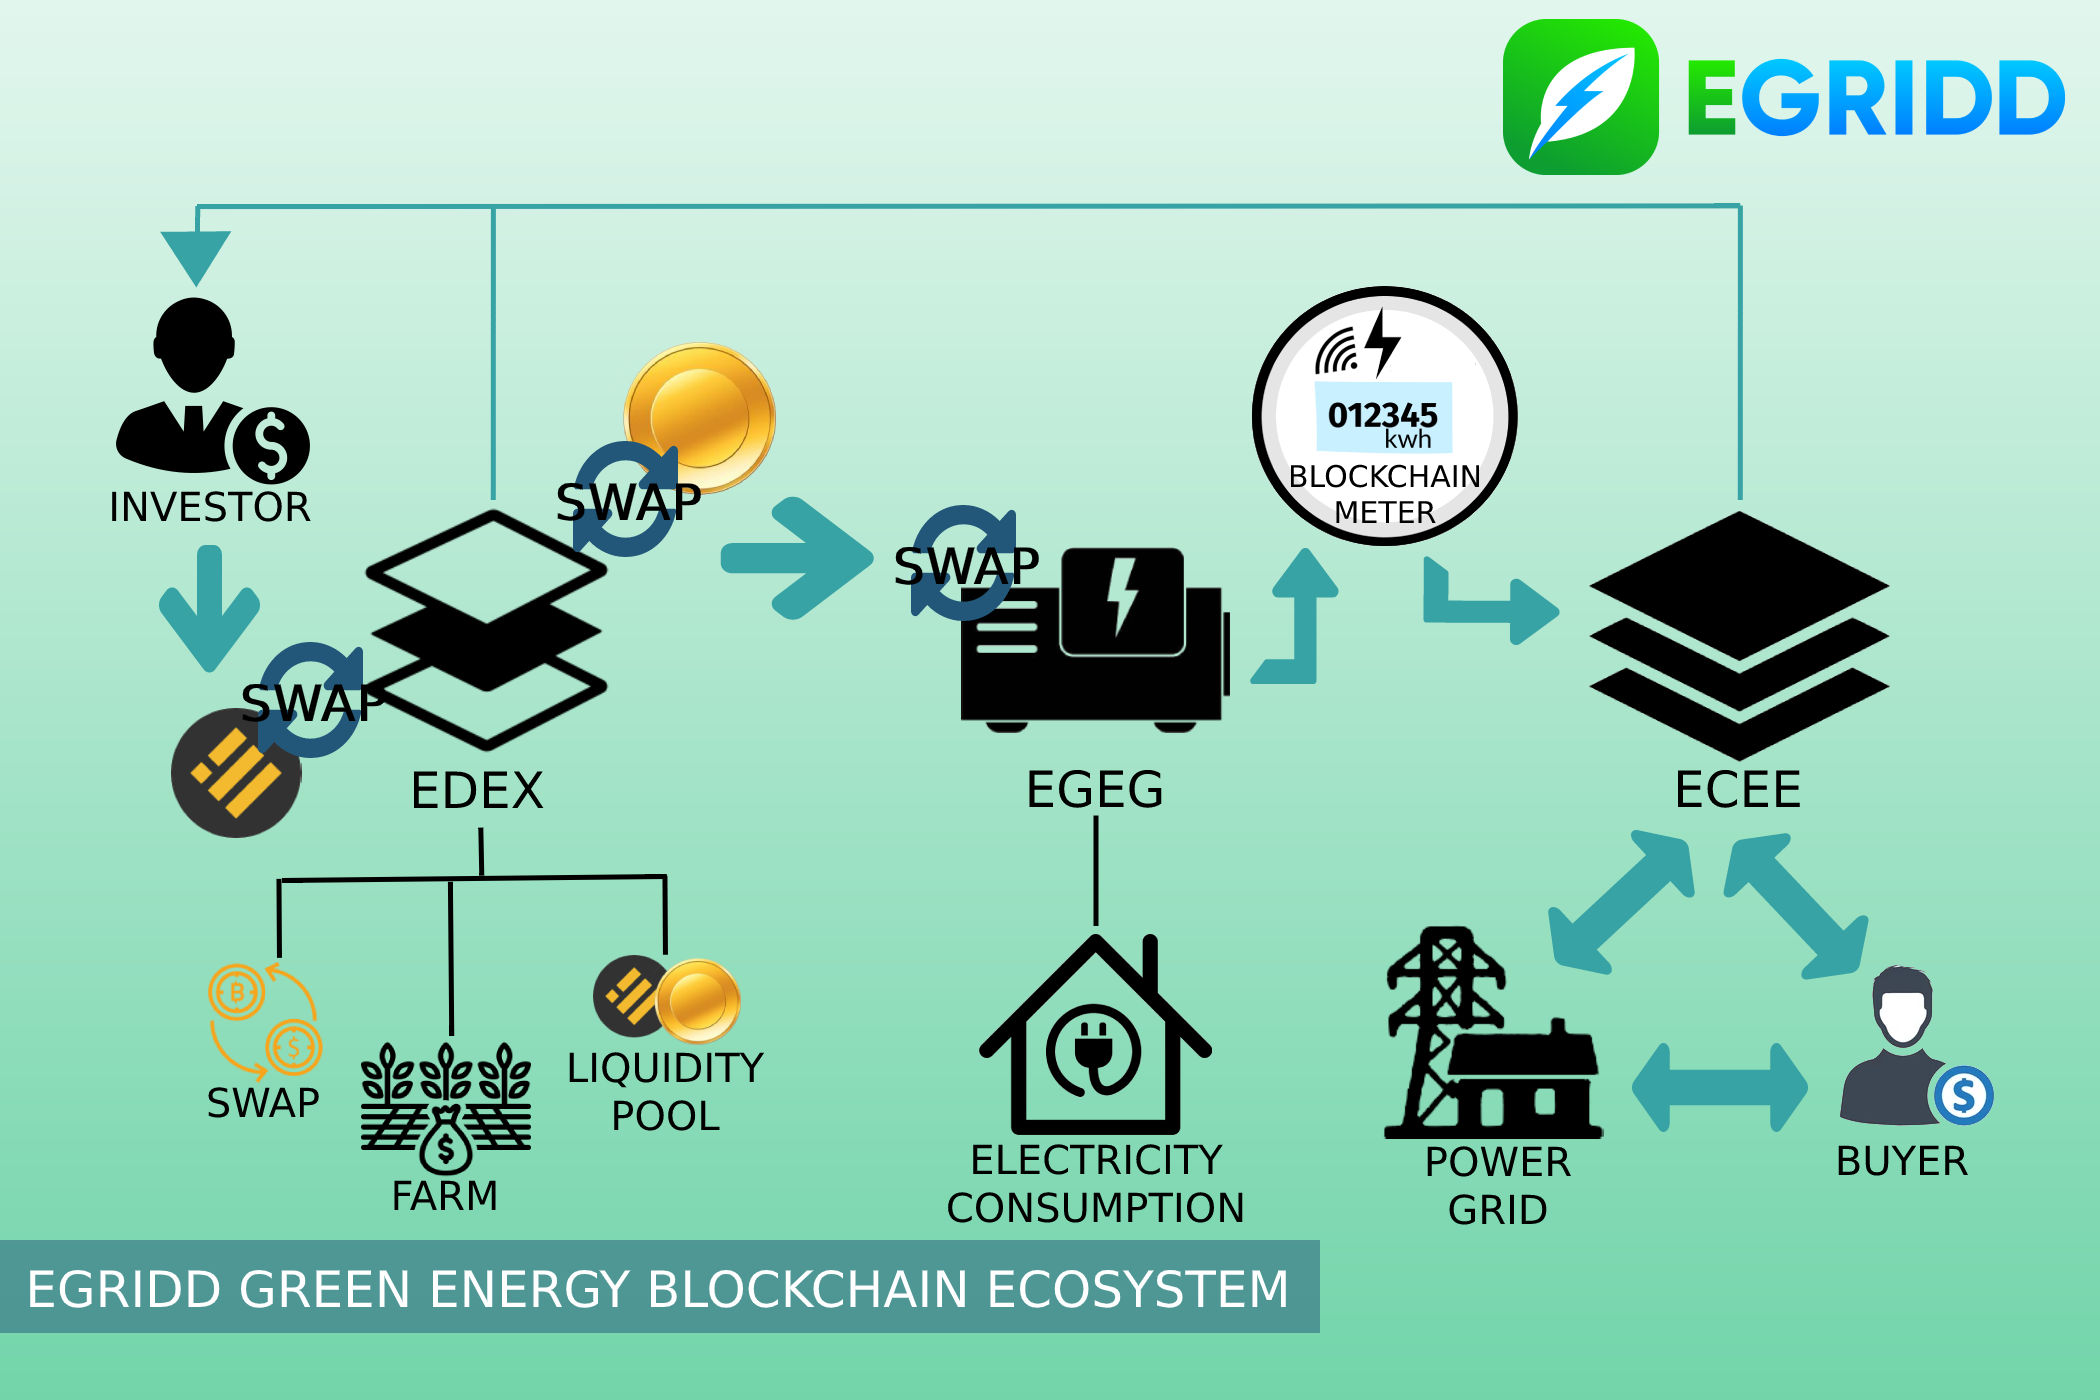 II. The Role of Blockchain in Decentralized Energy Trading